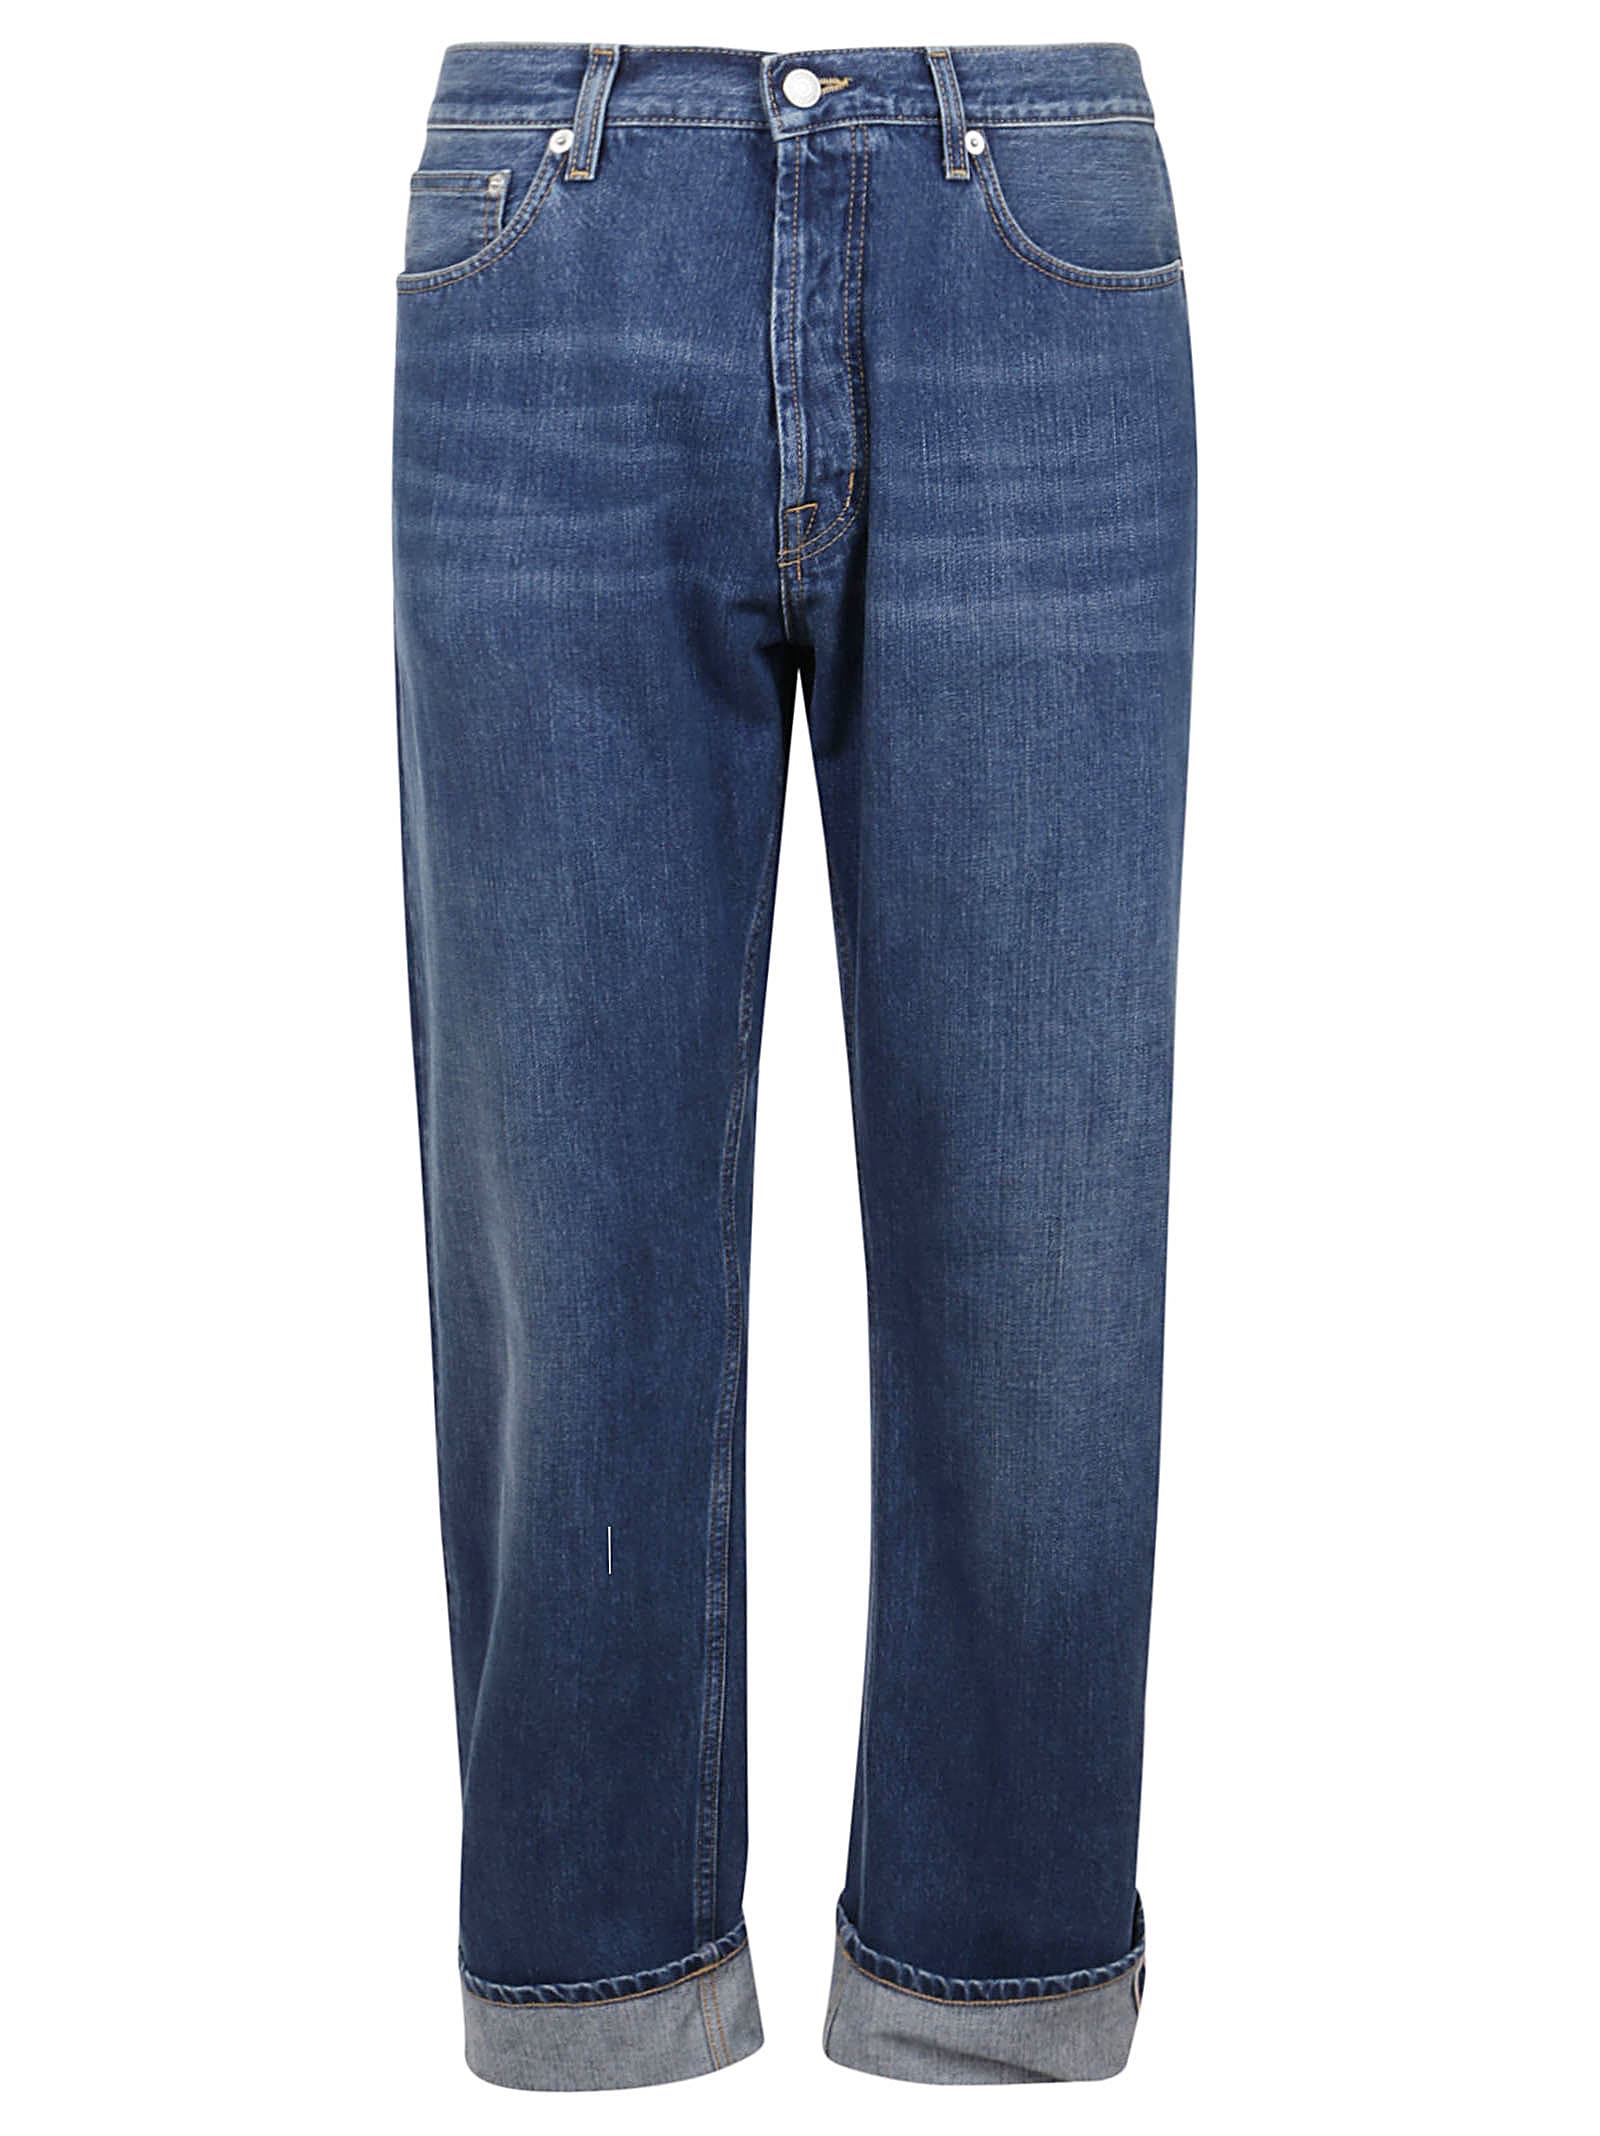 ALEXANDER MCQUEEN TURN UP JEANS,666649.QRY20 4001 BLUE WASHED